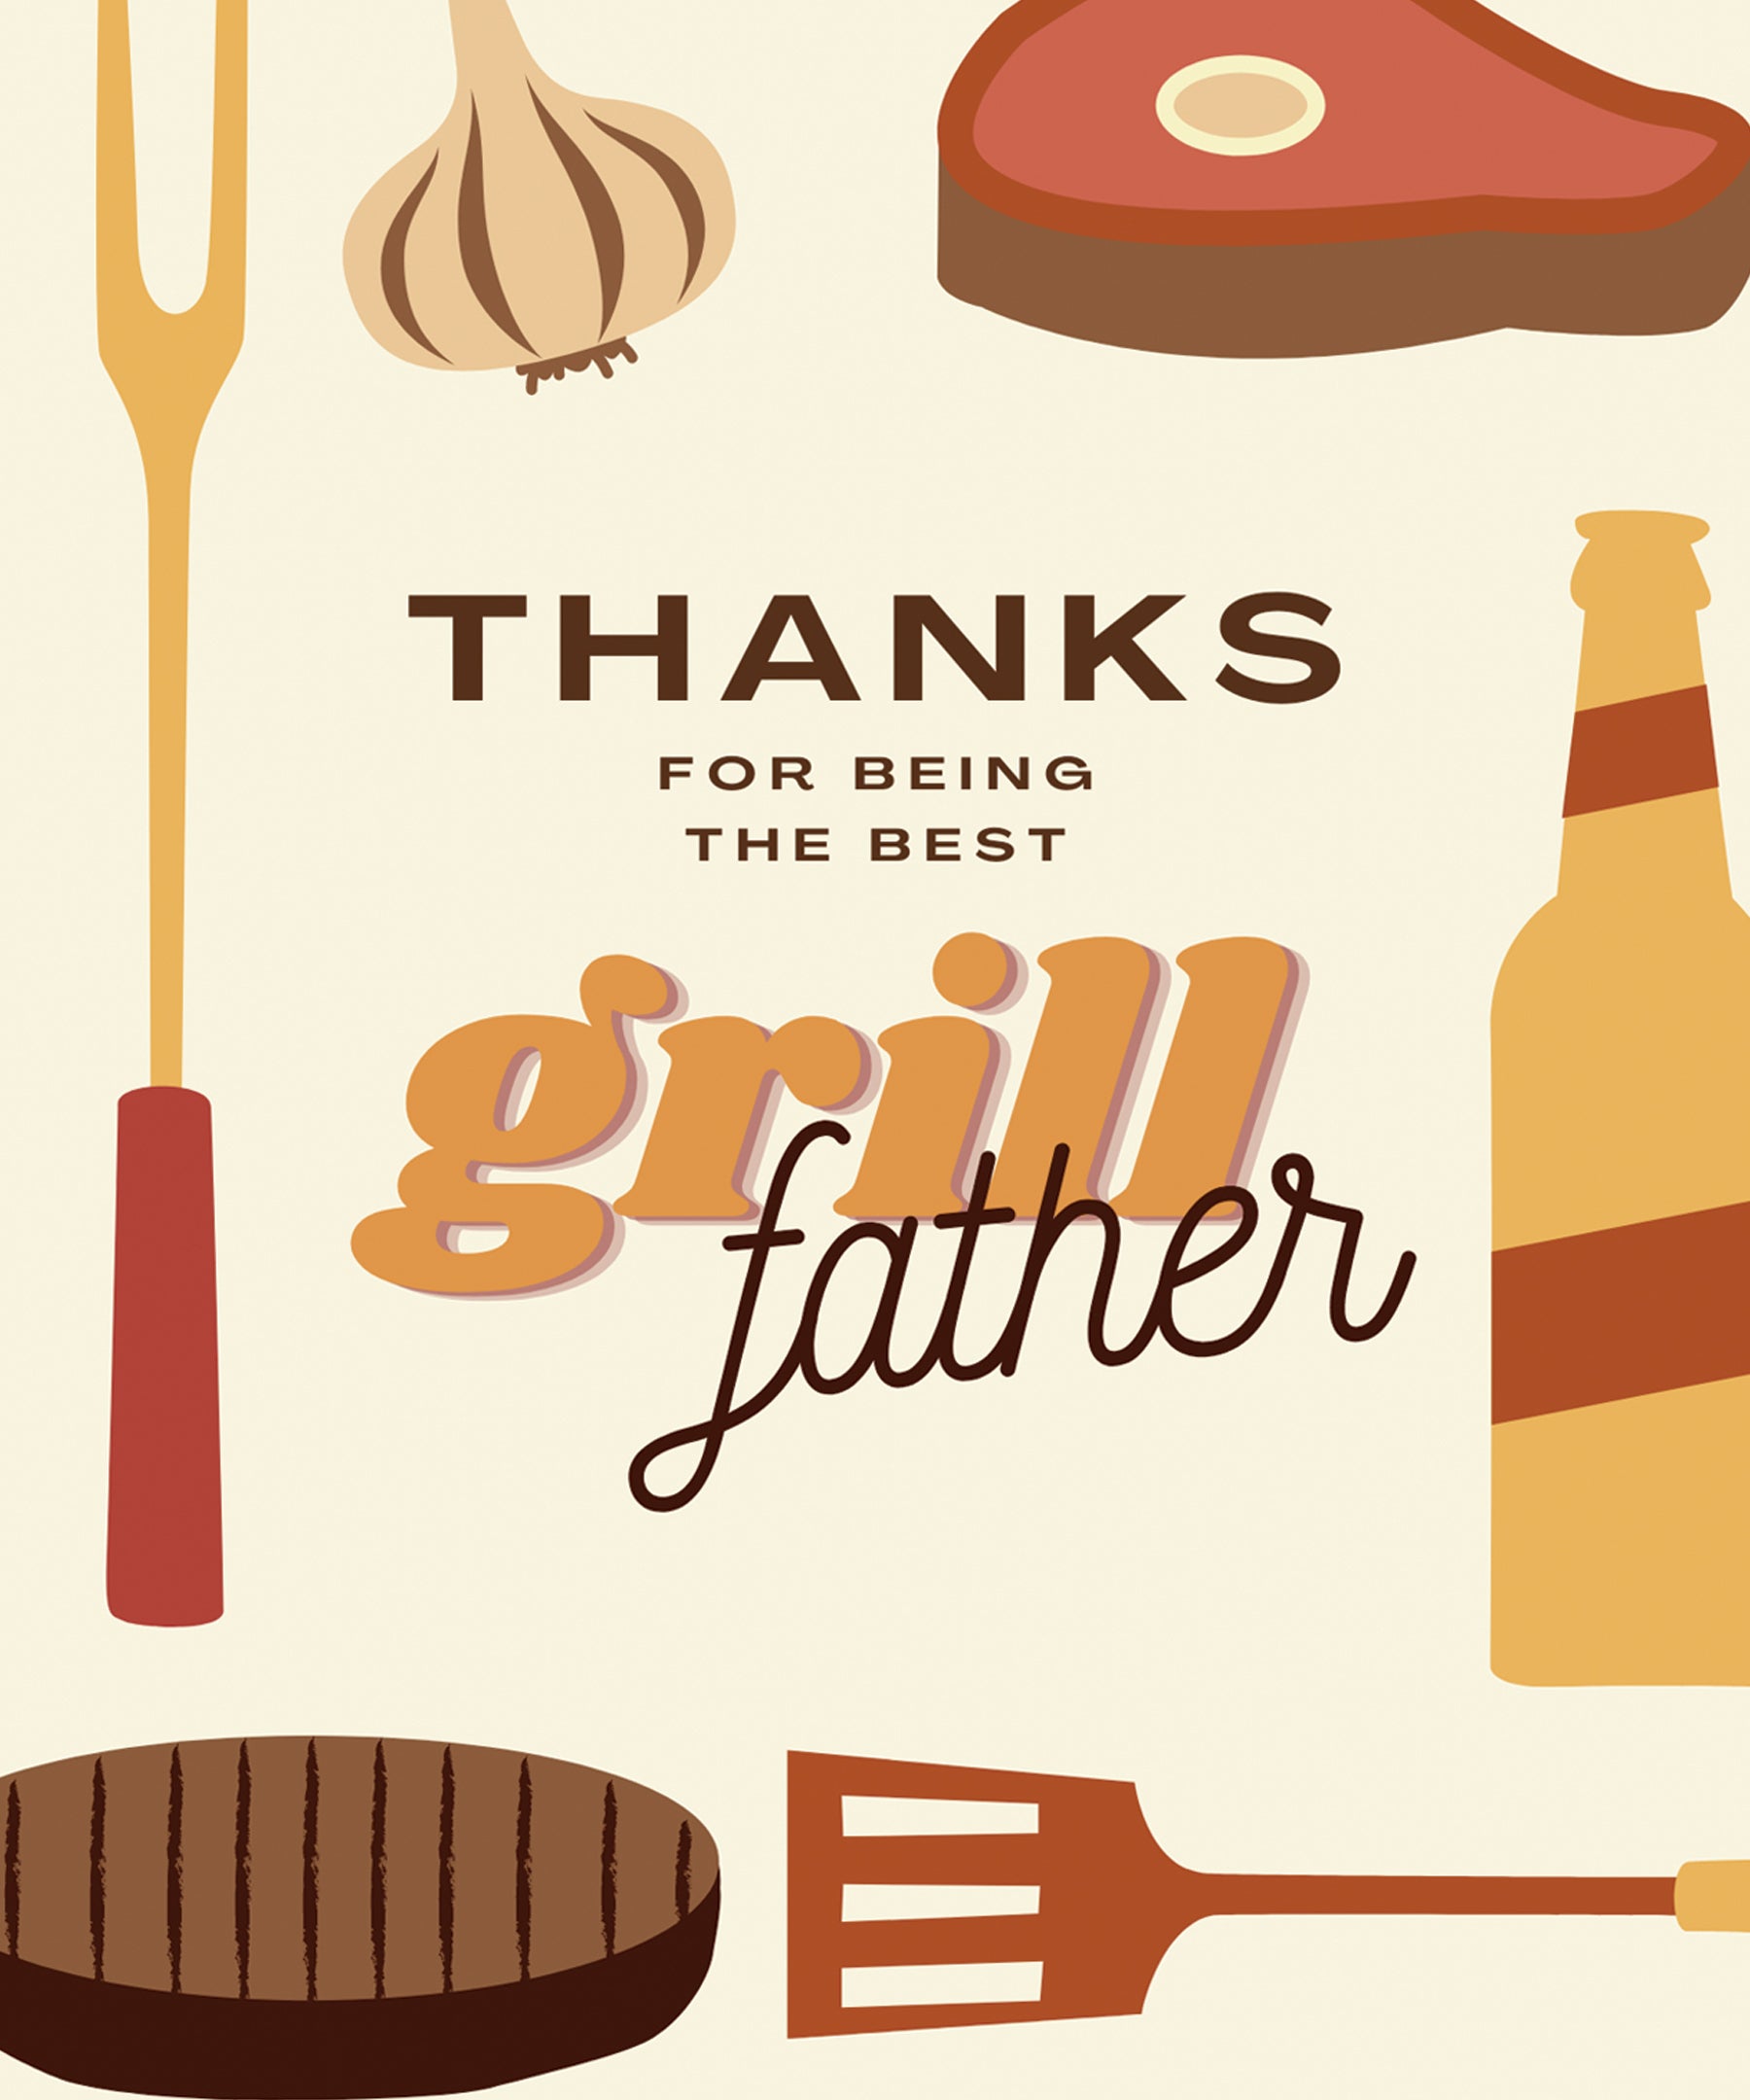 Grill Father Greeting Card